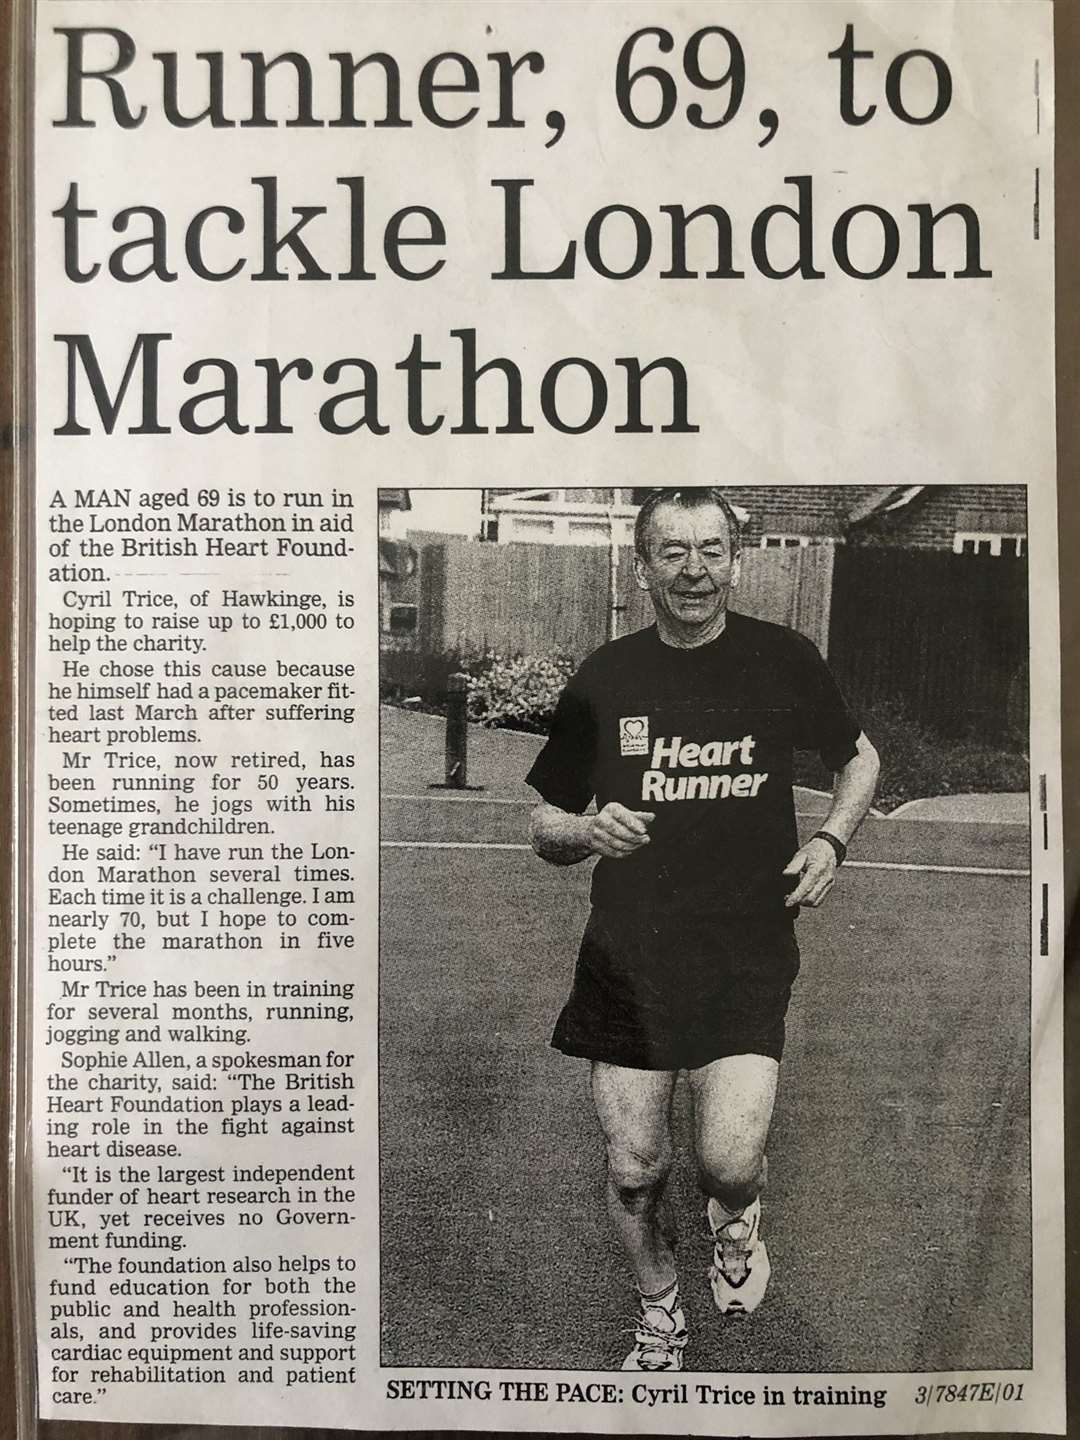 Cyril Price completed a marathon for the British Heart Foundation at 69